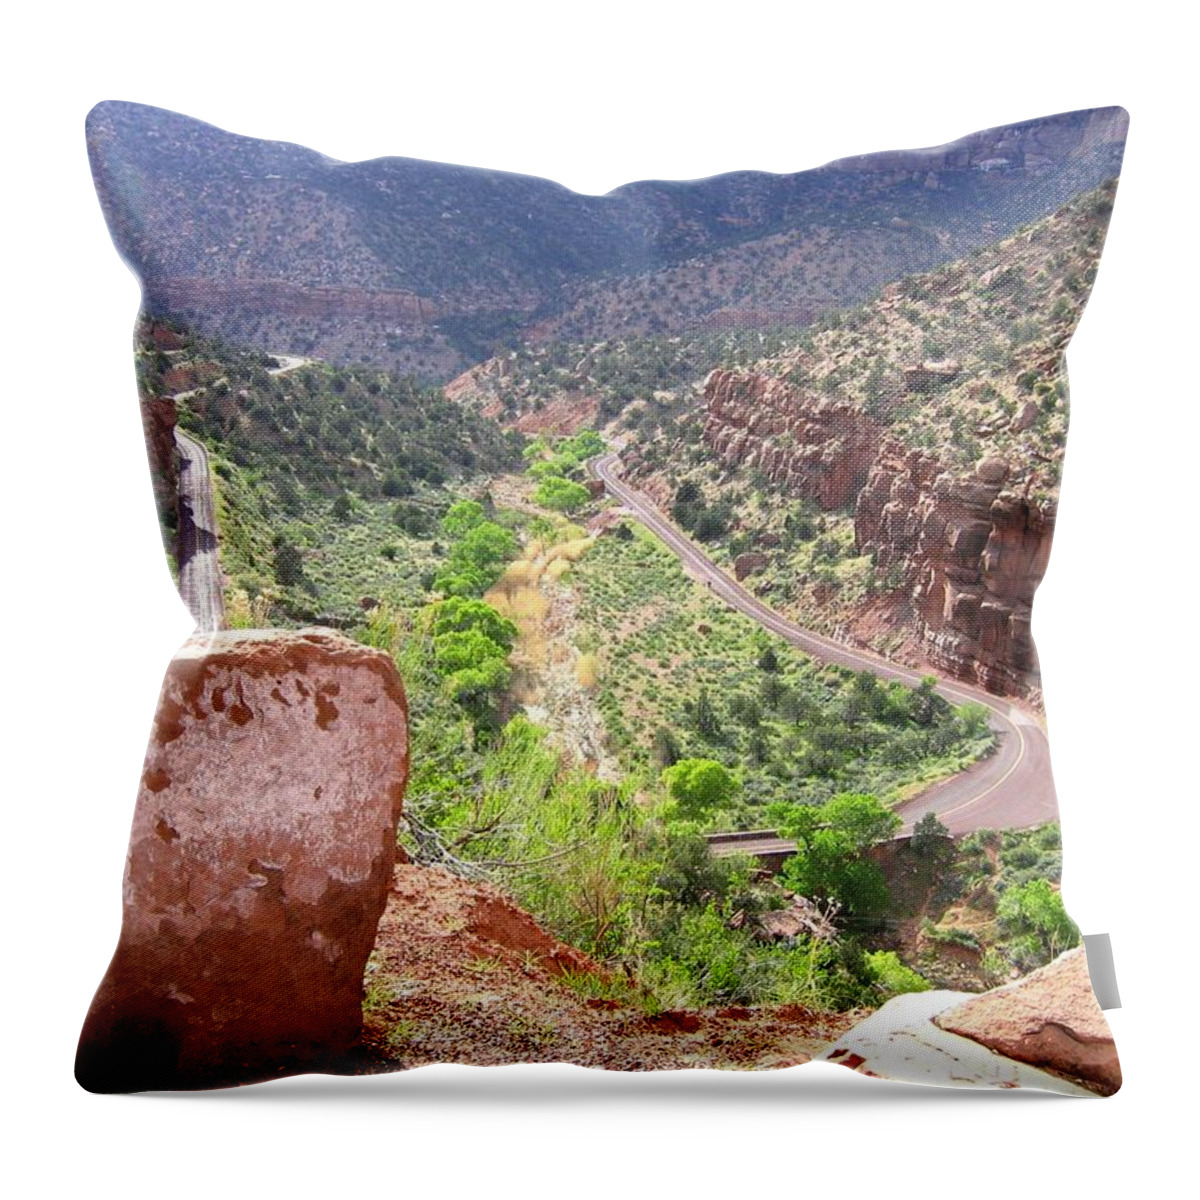 Utah 22 Throw Pillow featuring the photograph Utah 22 by Will Borden